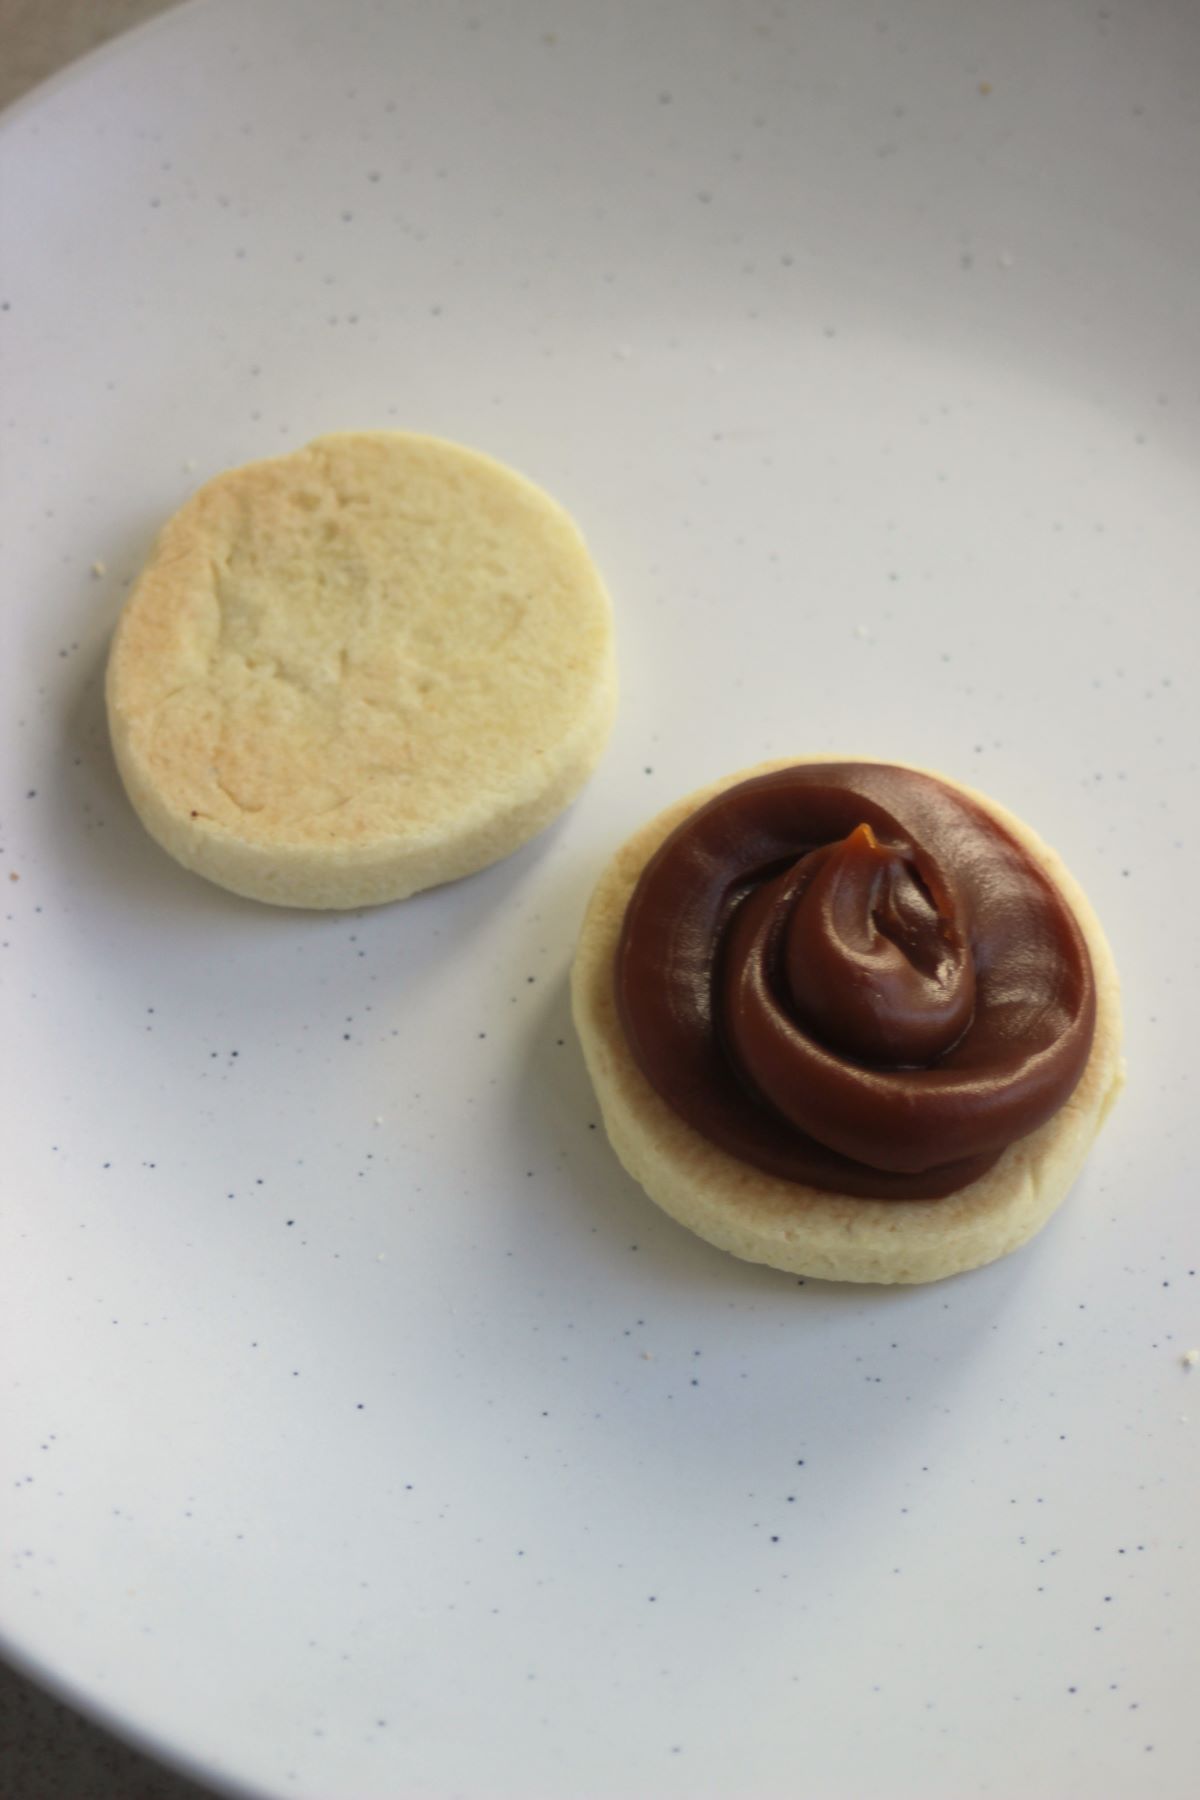 Two circles of alfajor dough, one with dulce de leche, on a white plate.